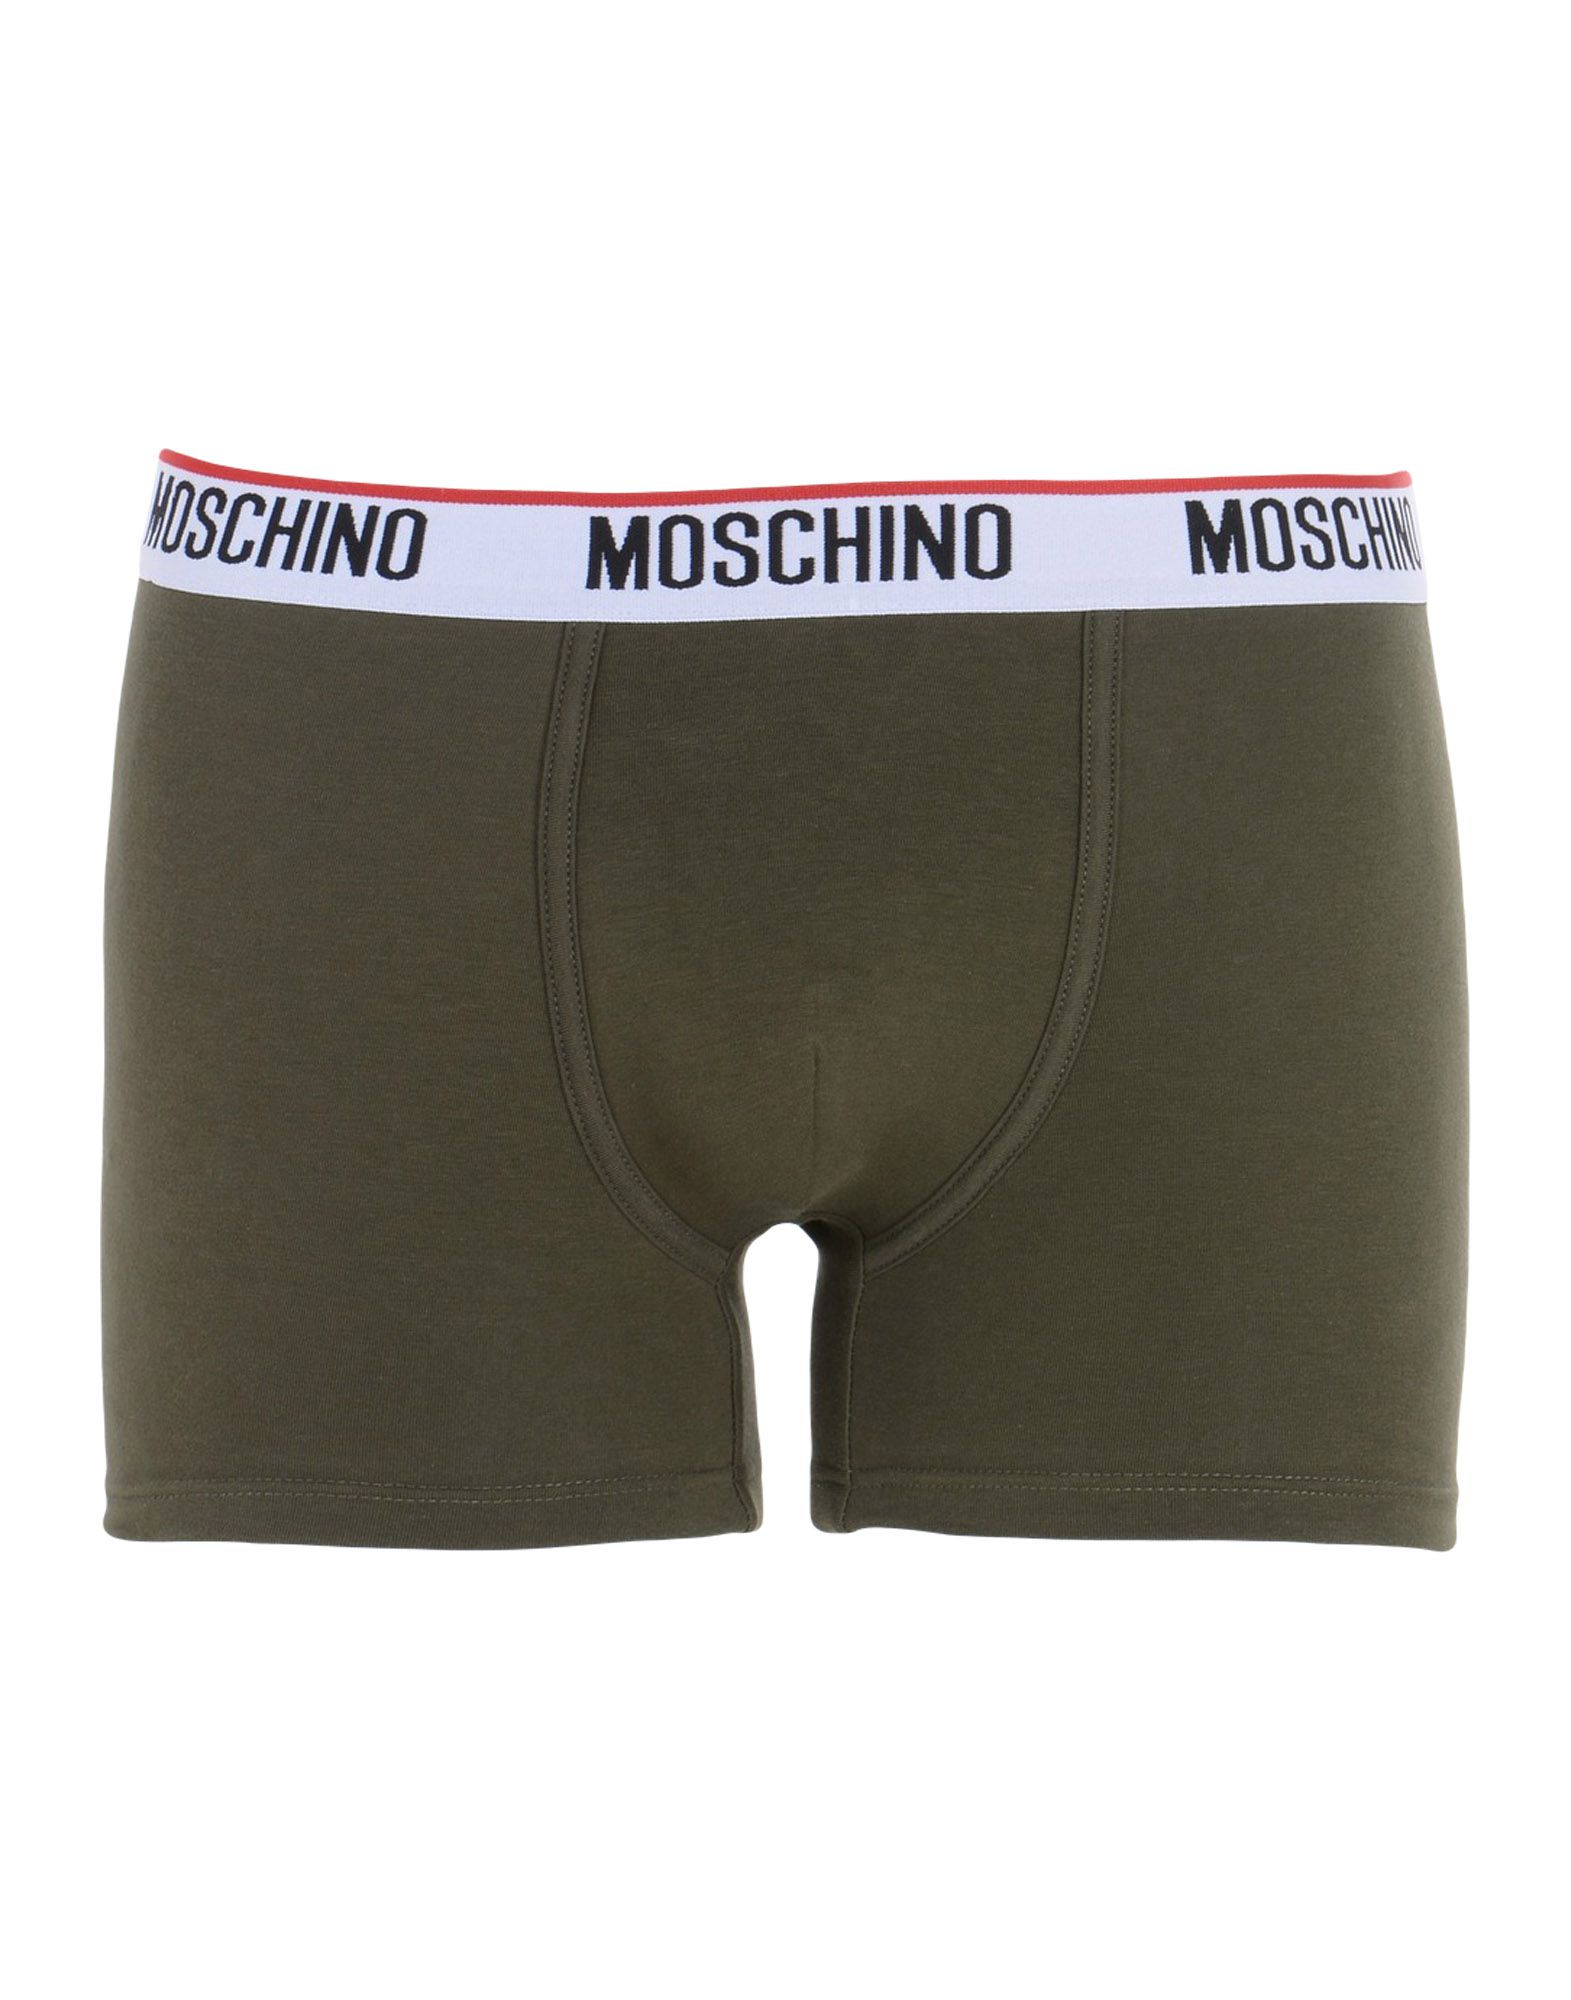 MOSCHINO BOXERS,48203581CH 3